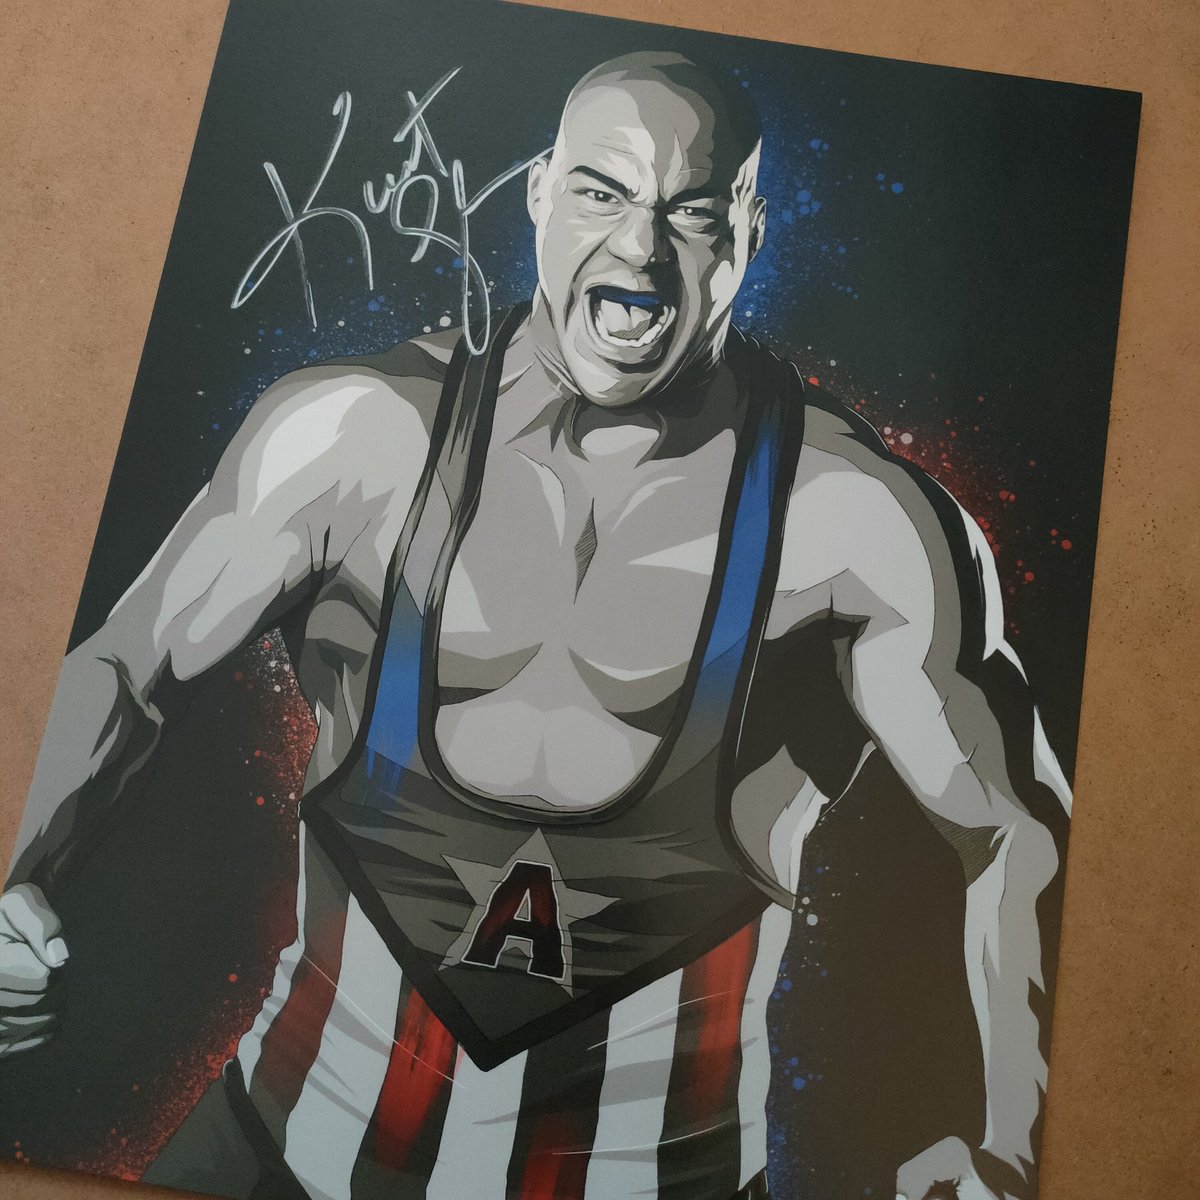 Today I received this photo signed by @RealKurtAngle, this is a new addition to my wrestling collection and comes thanks to @WrestleCrateUK who are doing amazing boxes so far this year, and always. Thanks Kurt and WC.